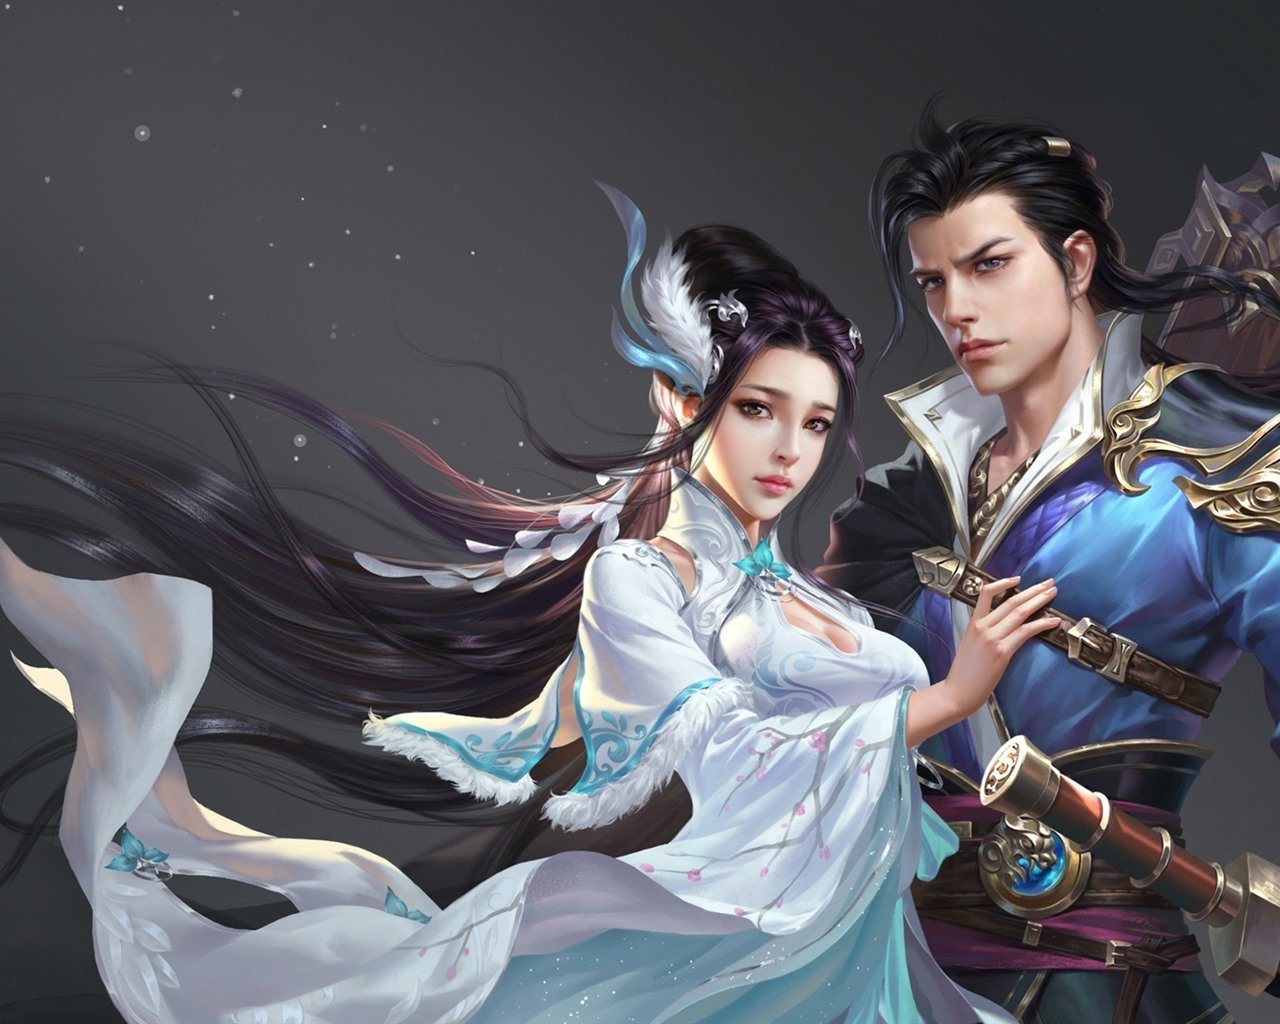 Wallpaper Fantasy Chinese girl and boy, art picture 1920x1080 Full HD 2K Picture, Image